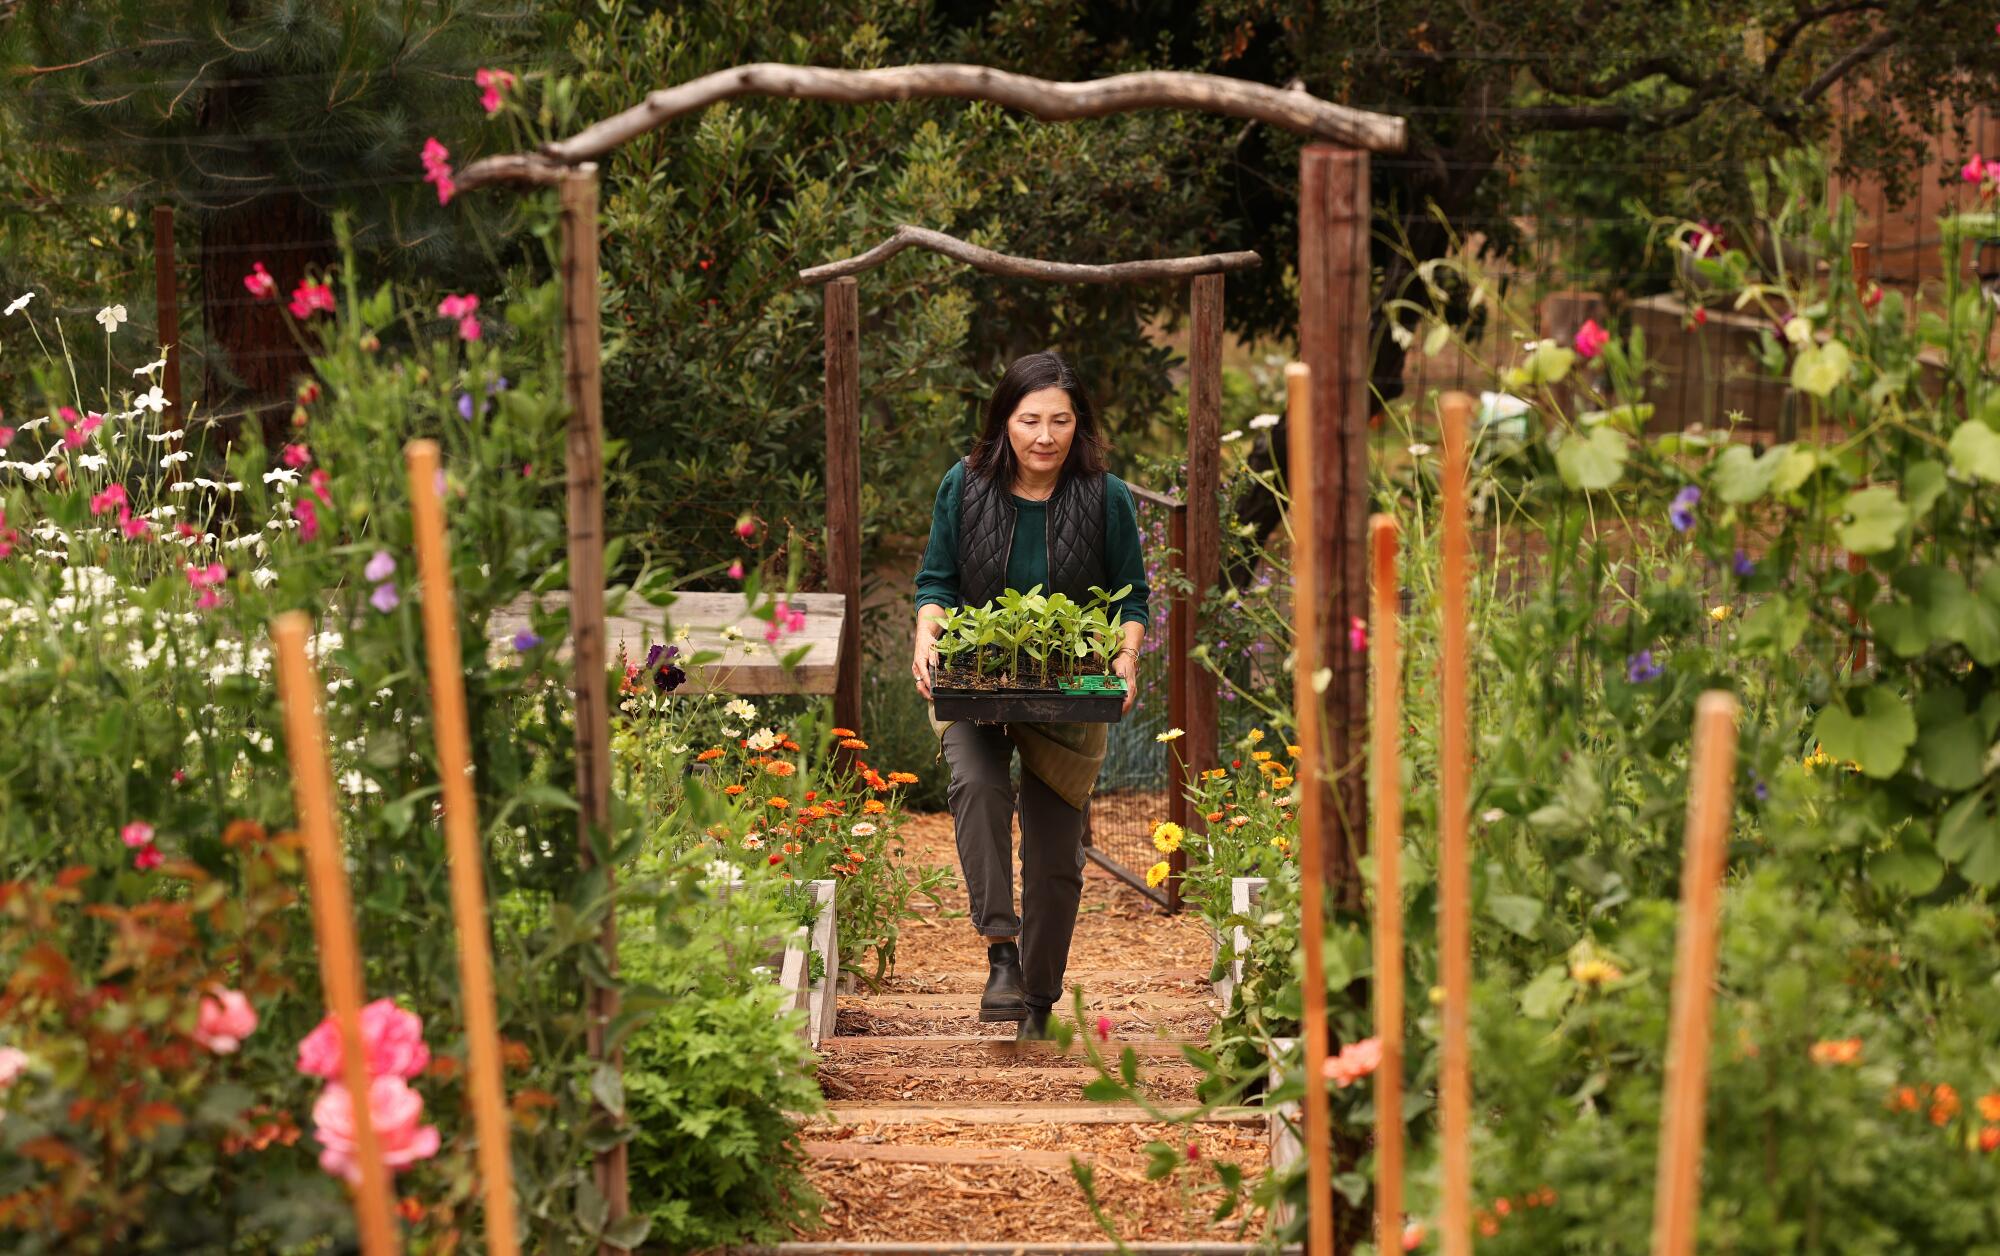 Ferguson carries zinnias she grew from seed up the stairs of her hillside garden.